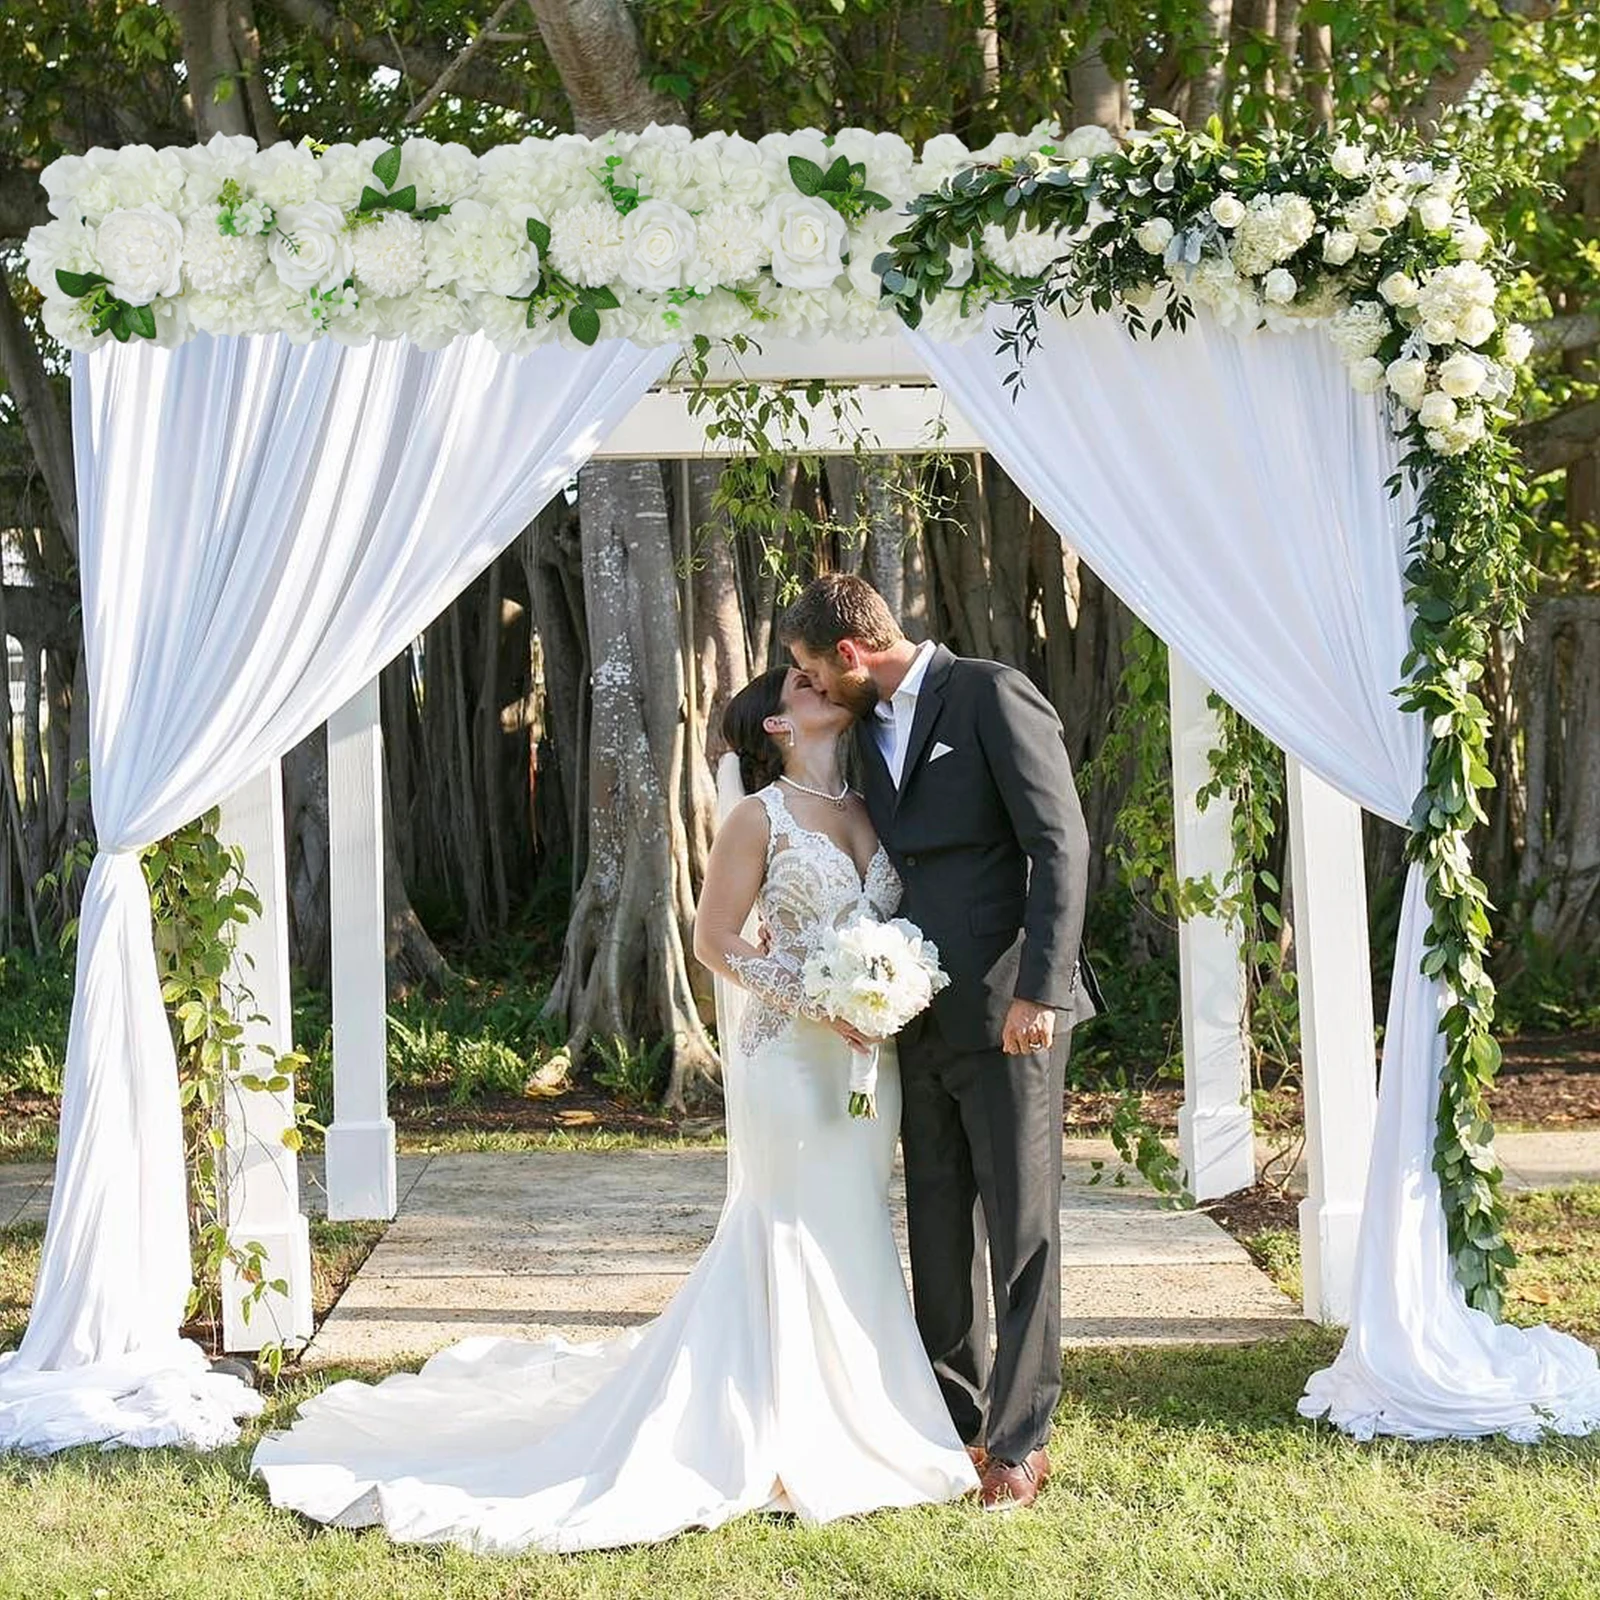 Artificial Floral Rose Wedding Arch Panels